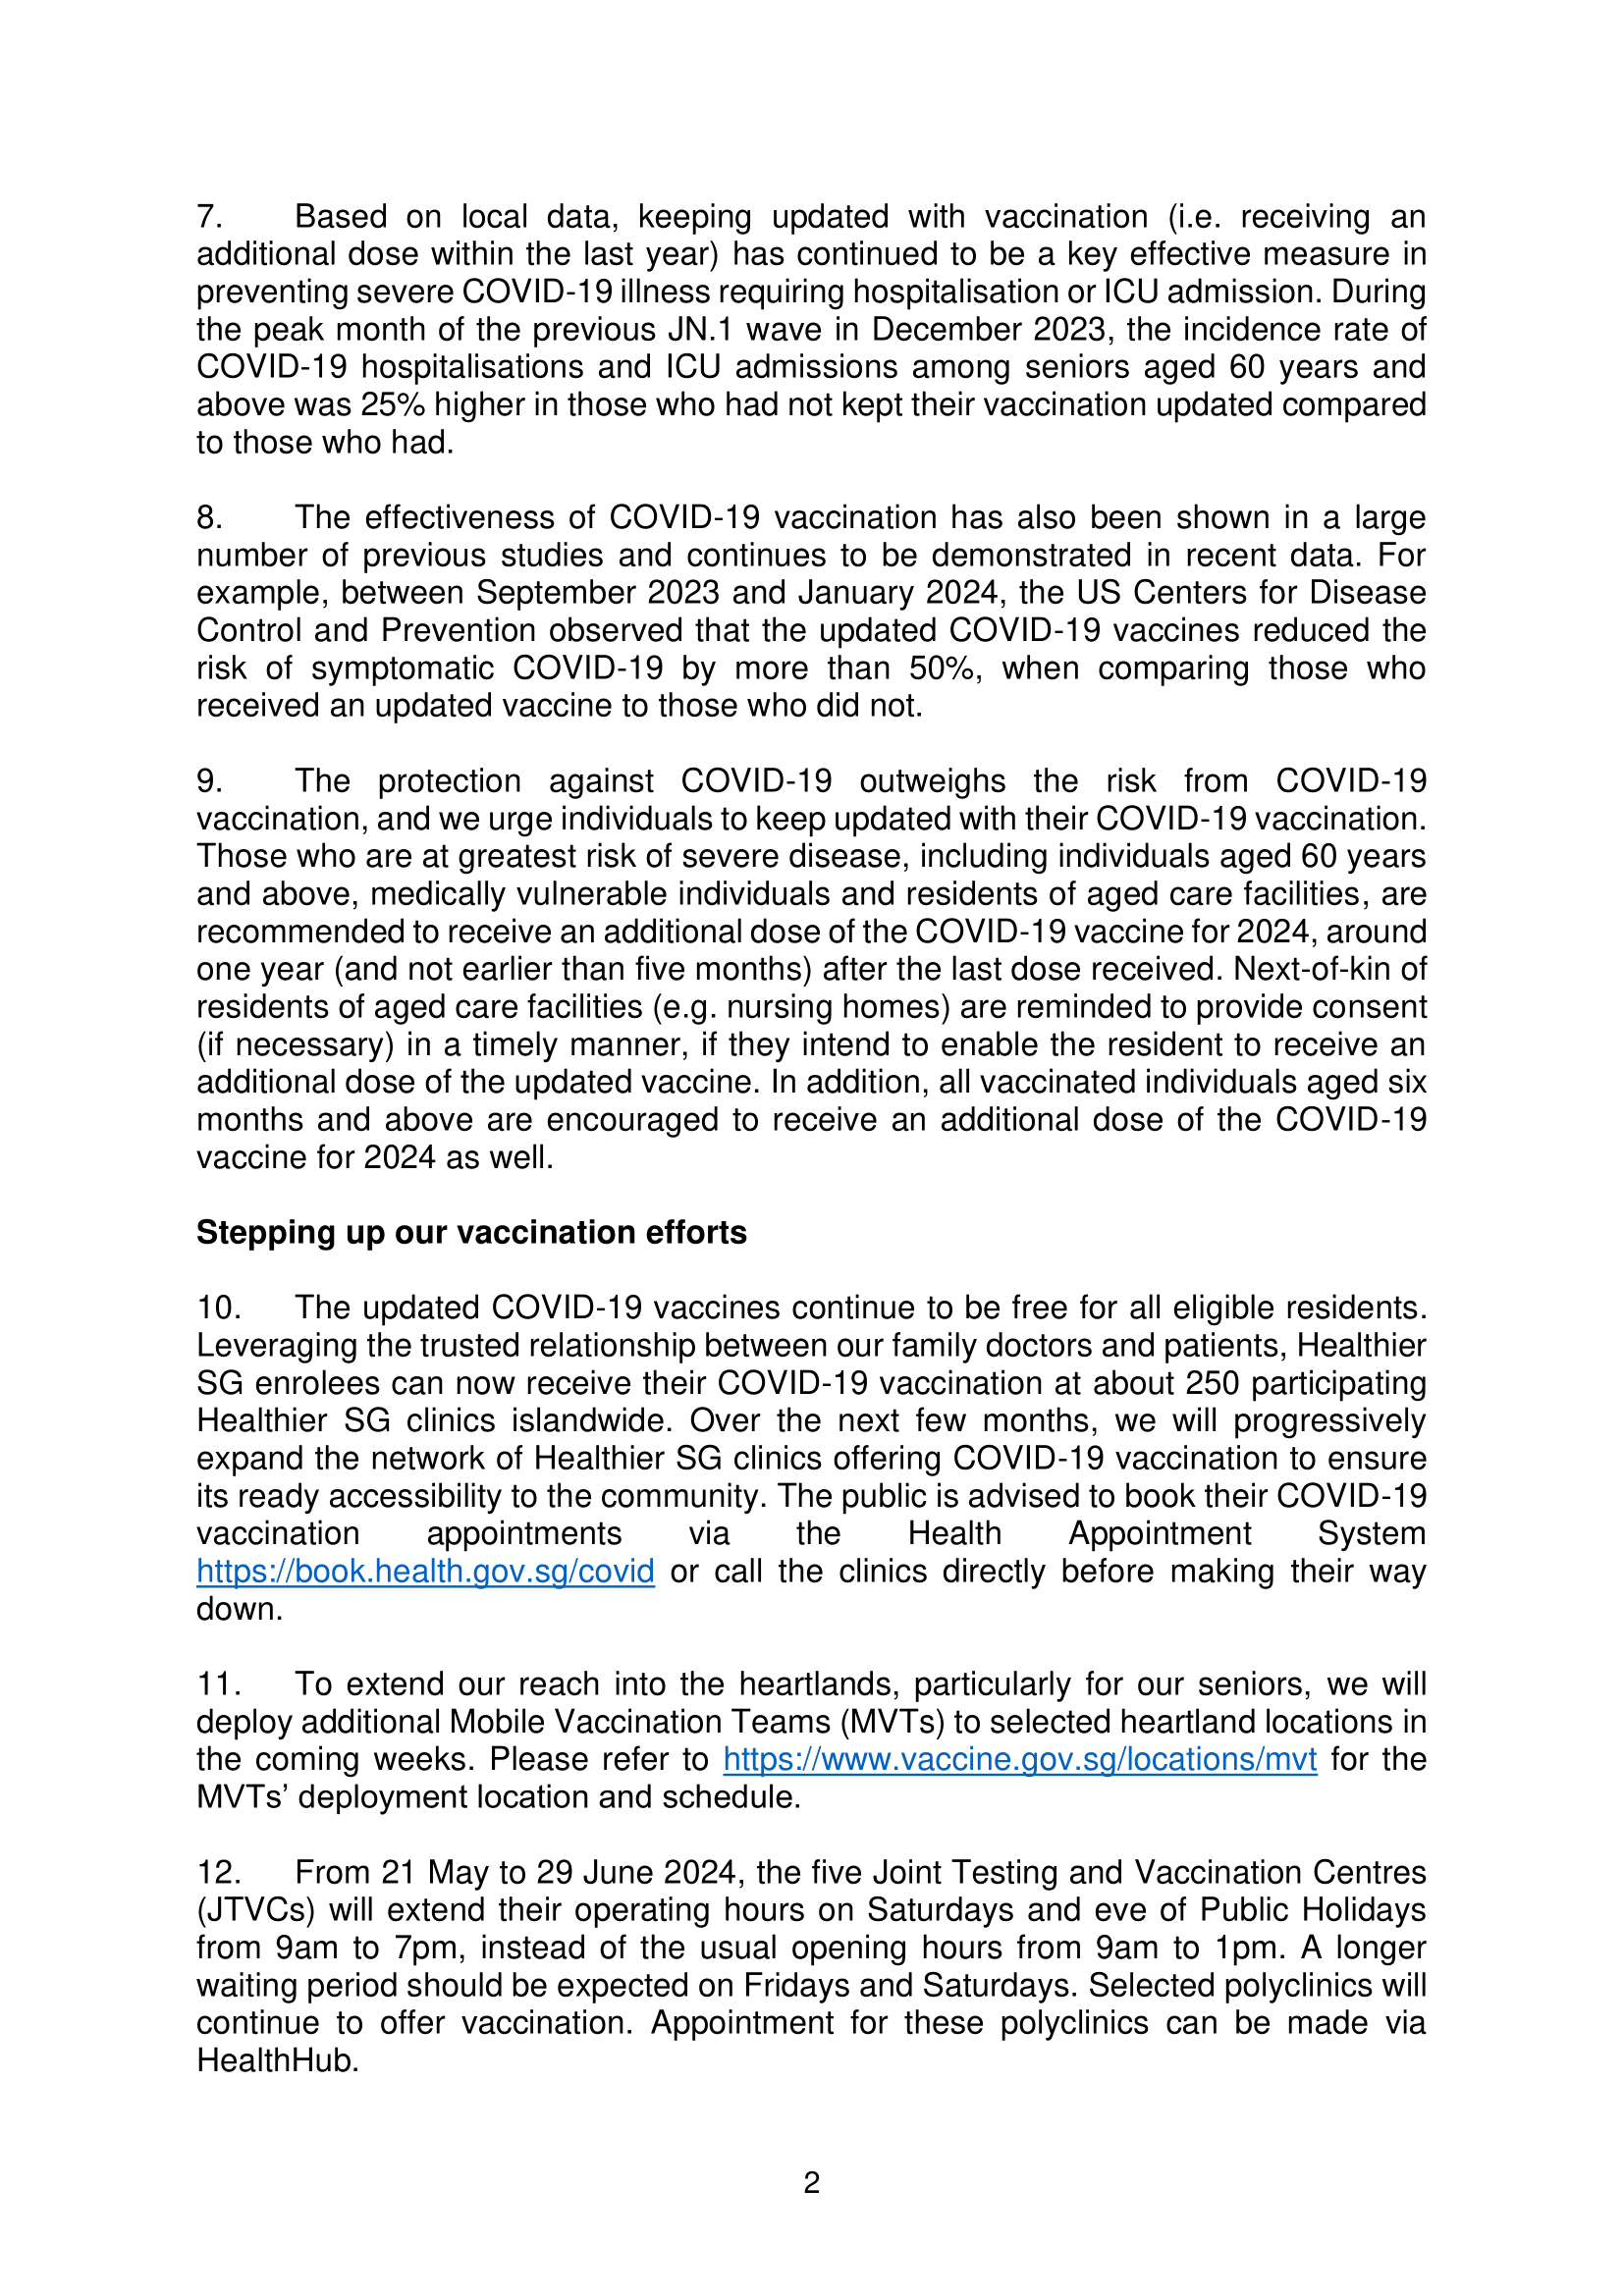 [MOH Connected] Press Release - Update on Local COVID-19 Situation May 2024 v2-2.png